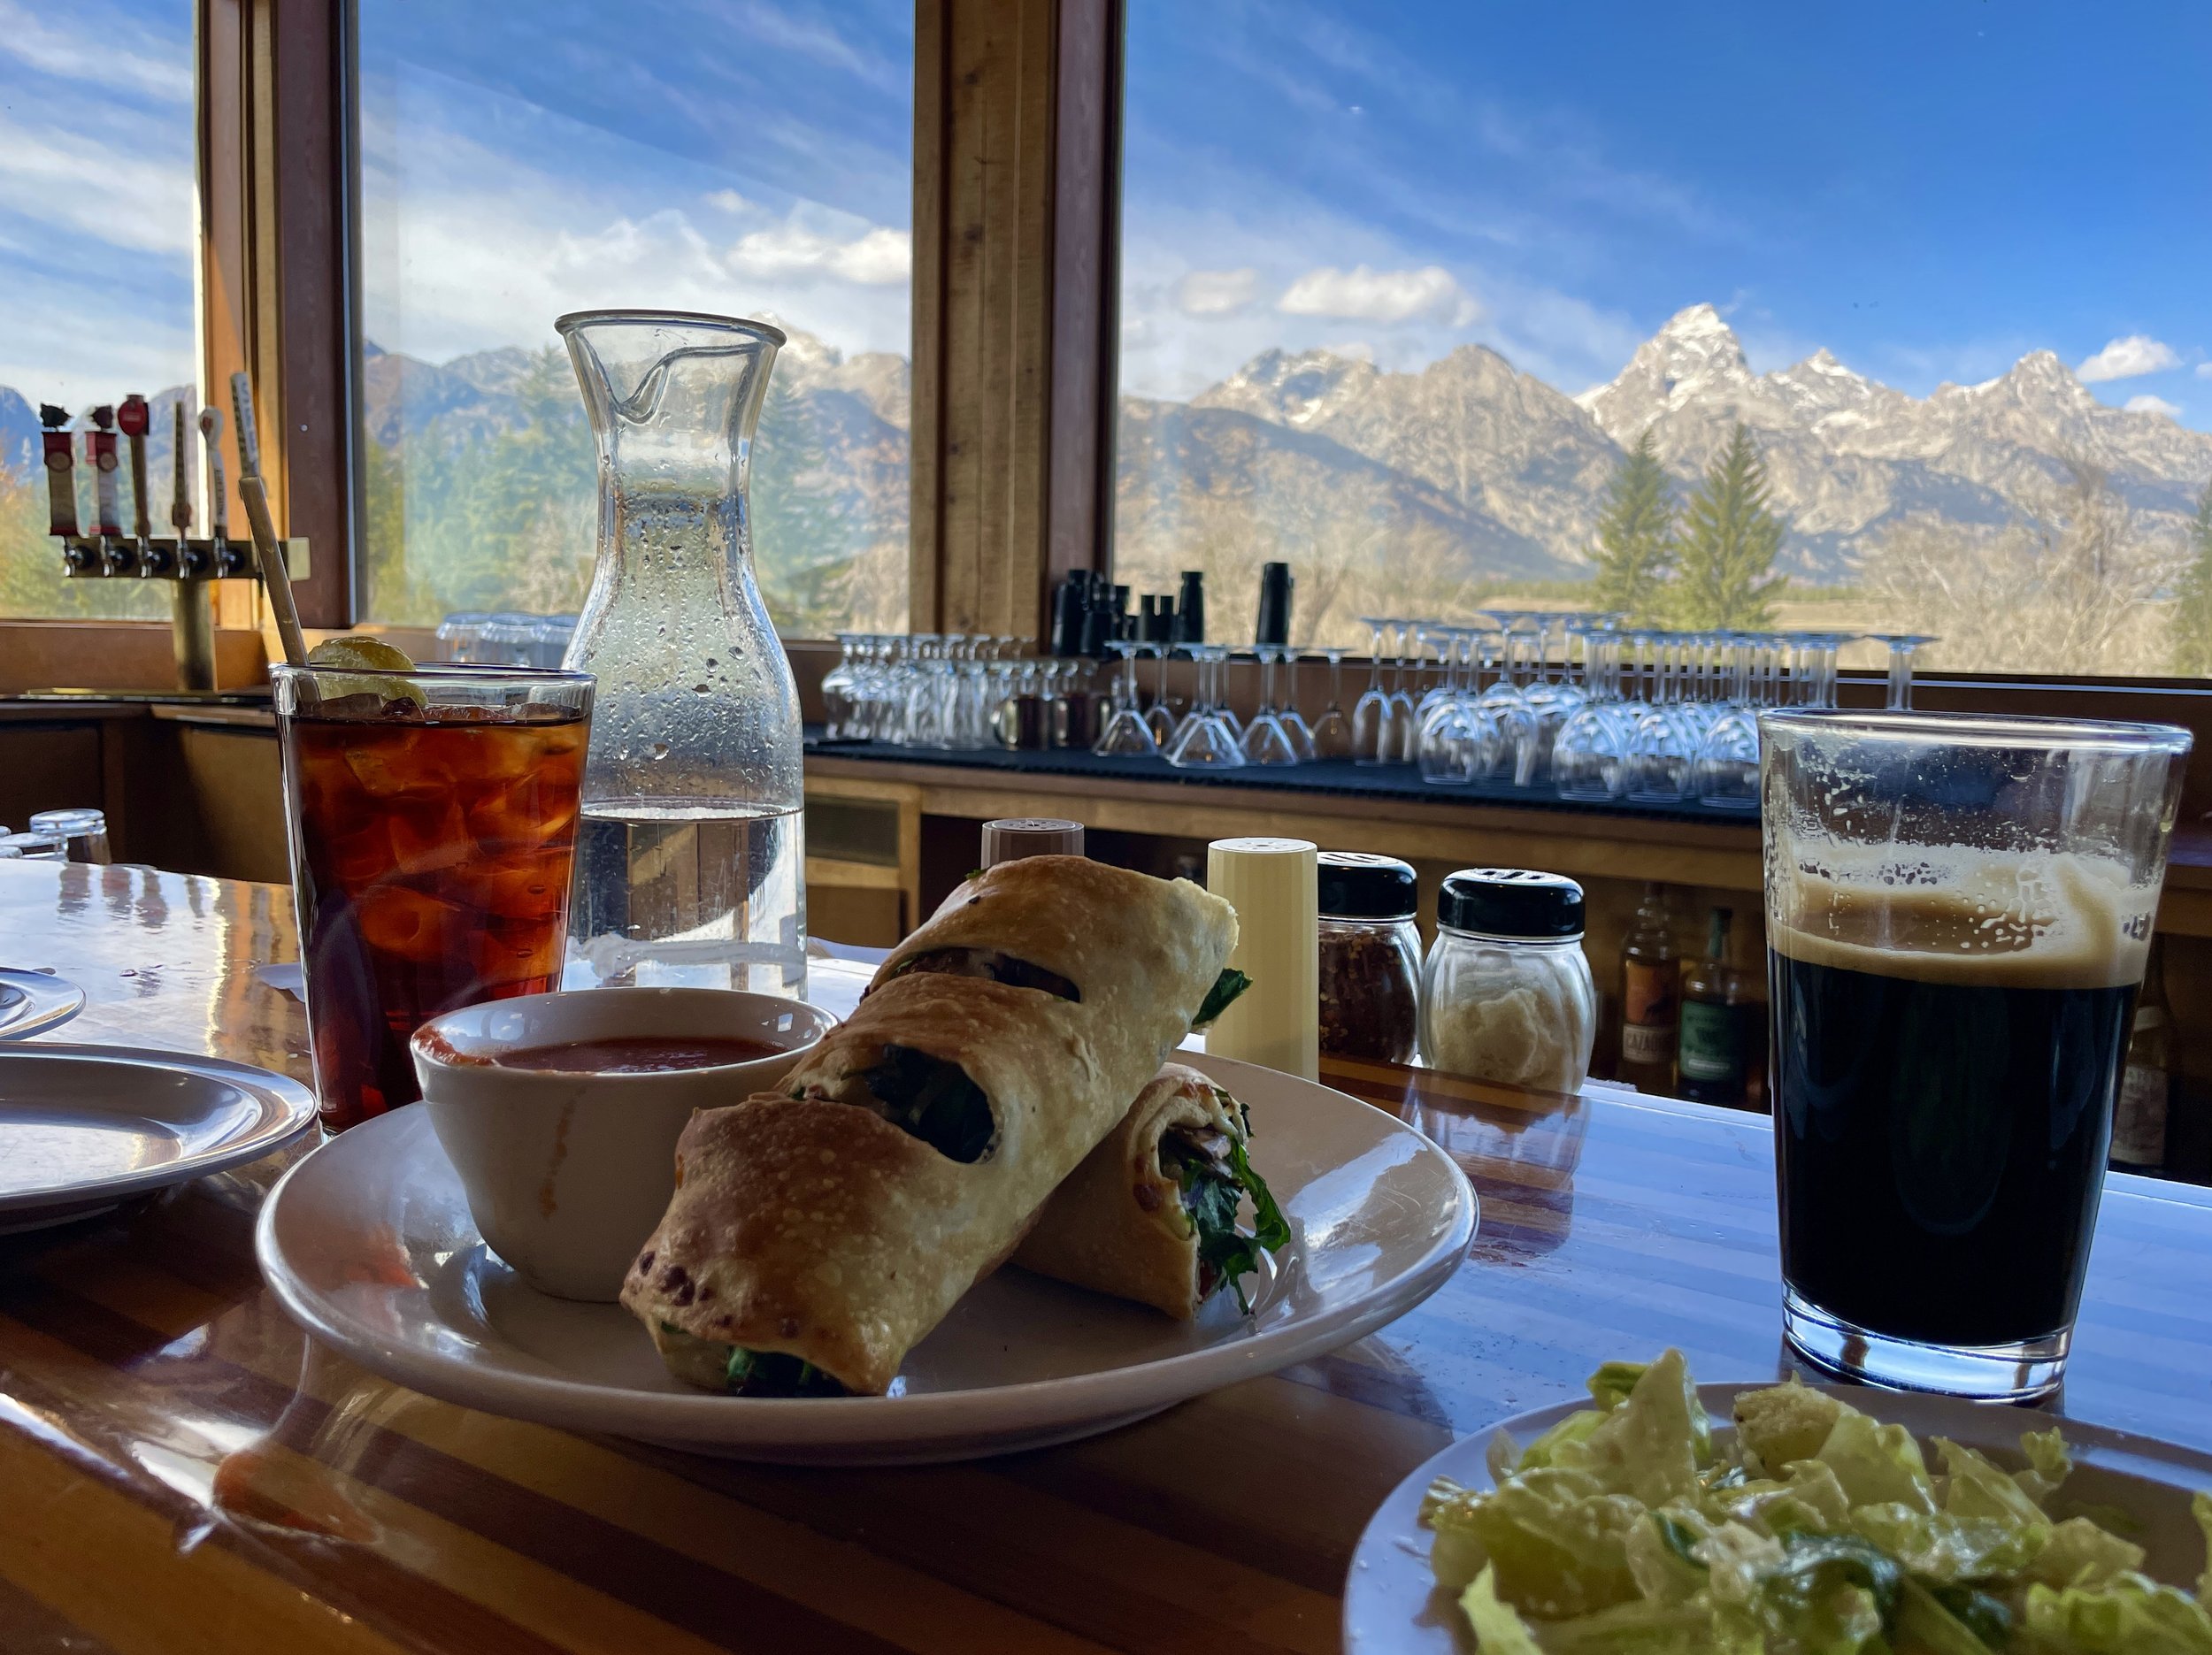  But the reward was a delicious lunch with a view, at Dornan’s Pizza &amp; Pasta Co. &amp; The Spur Bar, in Moose.    “Veggie Stromboli - Spinach, Sun Dried Tomatoes, Red Onions, Mushrooms, Black Olives, with Mozzarella &amp; Marinara dipping sauce.”